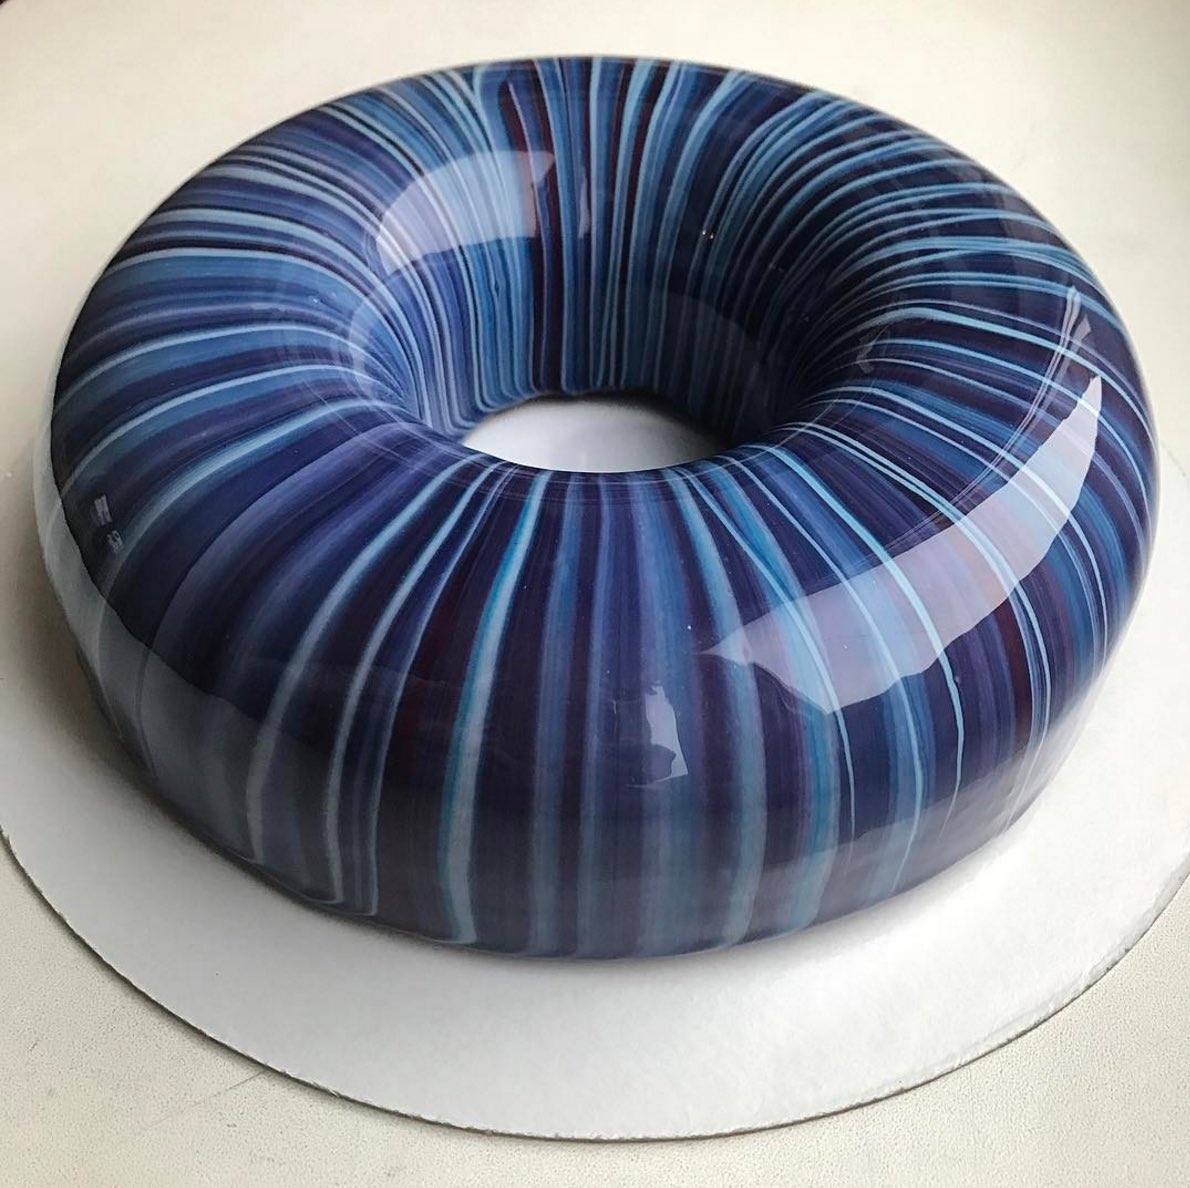 perfect pics - very satisfying blue cake looks like a glass marble